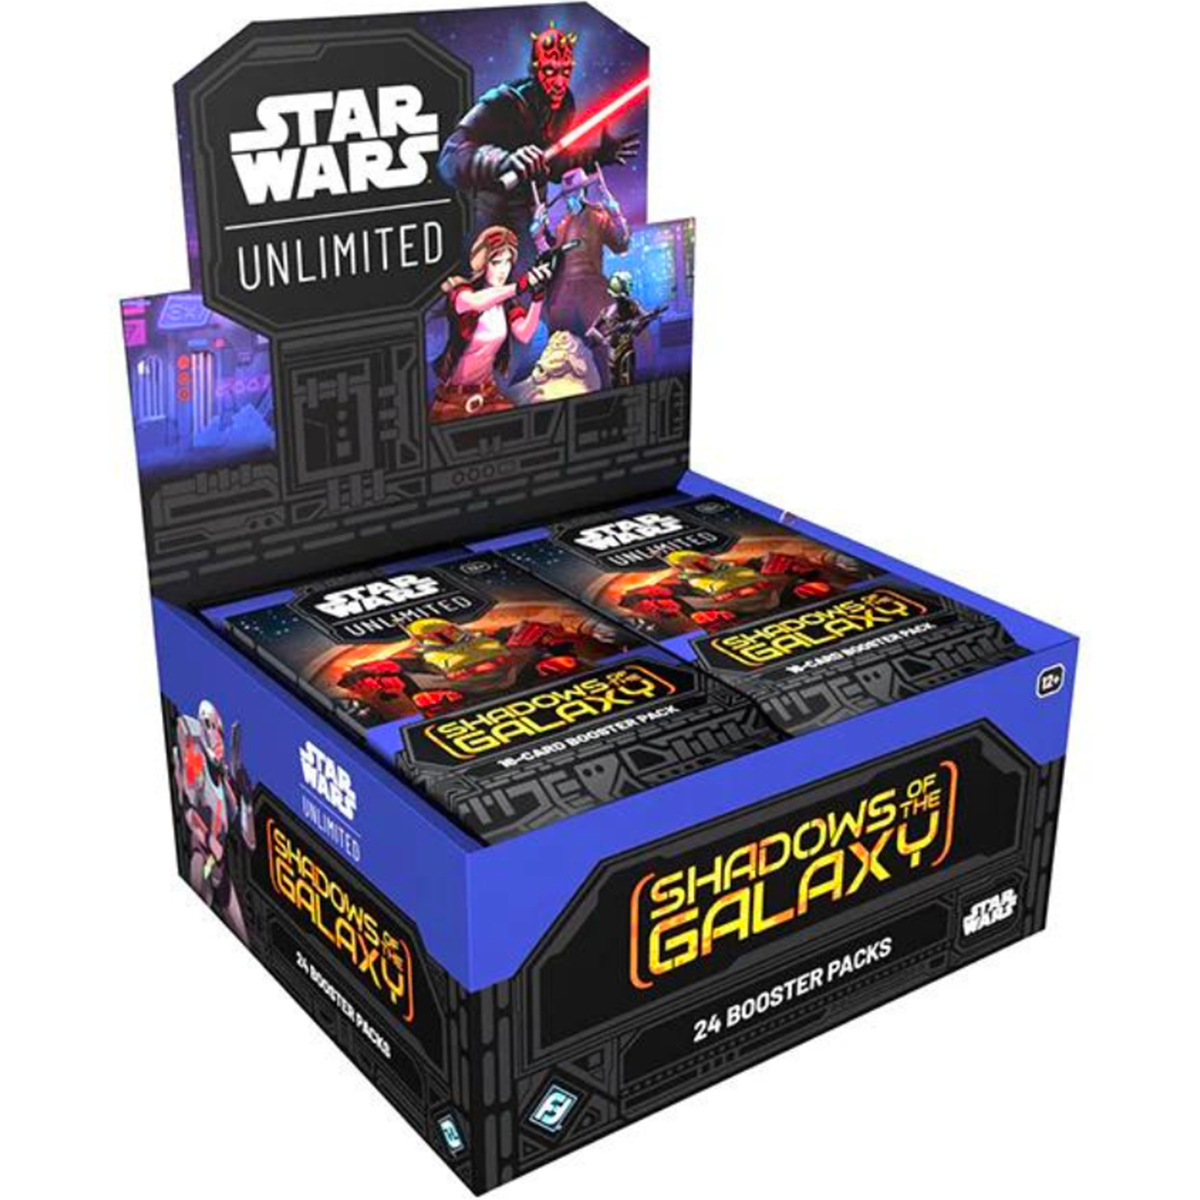 star wars unlimited - shadow of the galaxy - box 24 buste (eng)